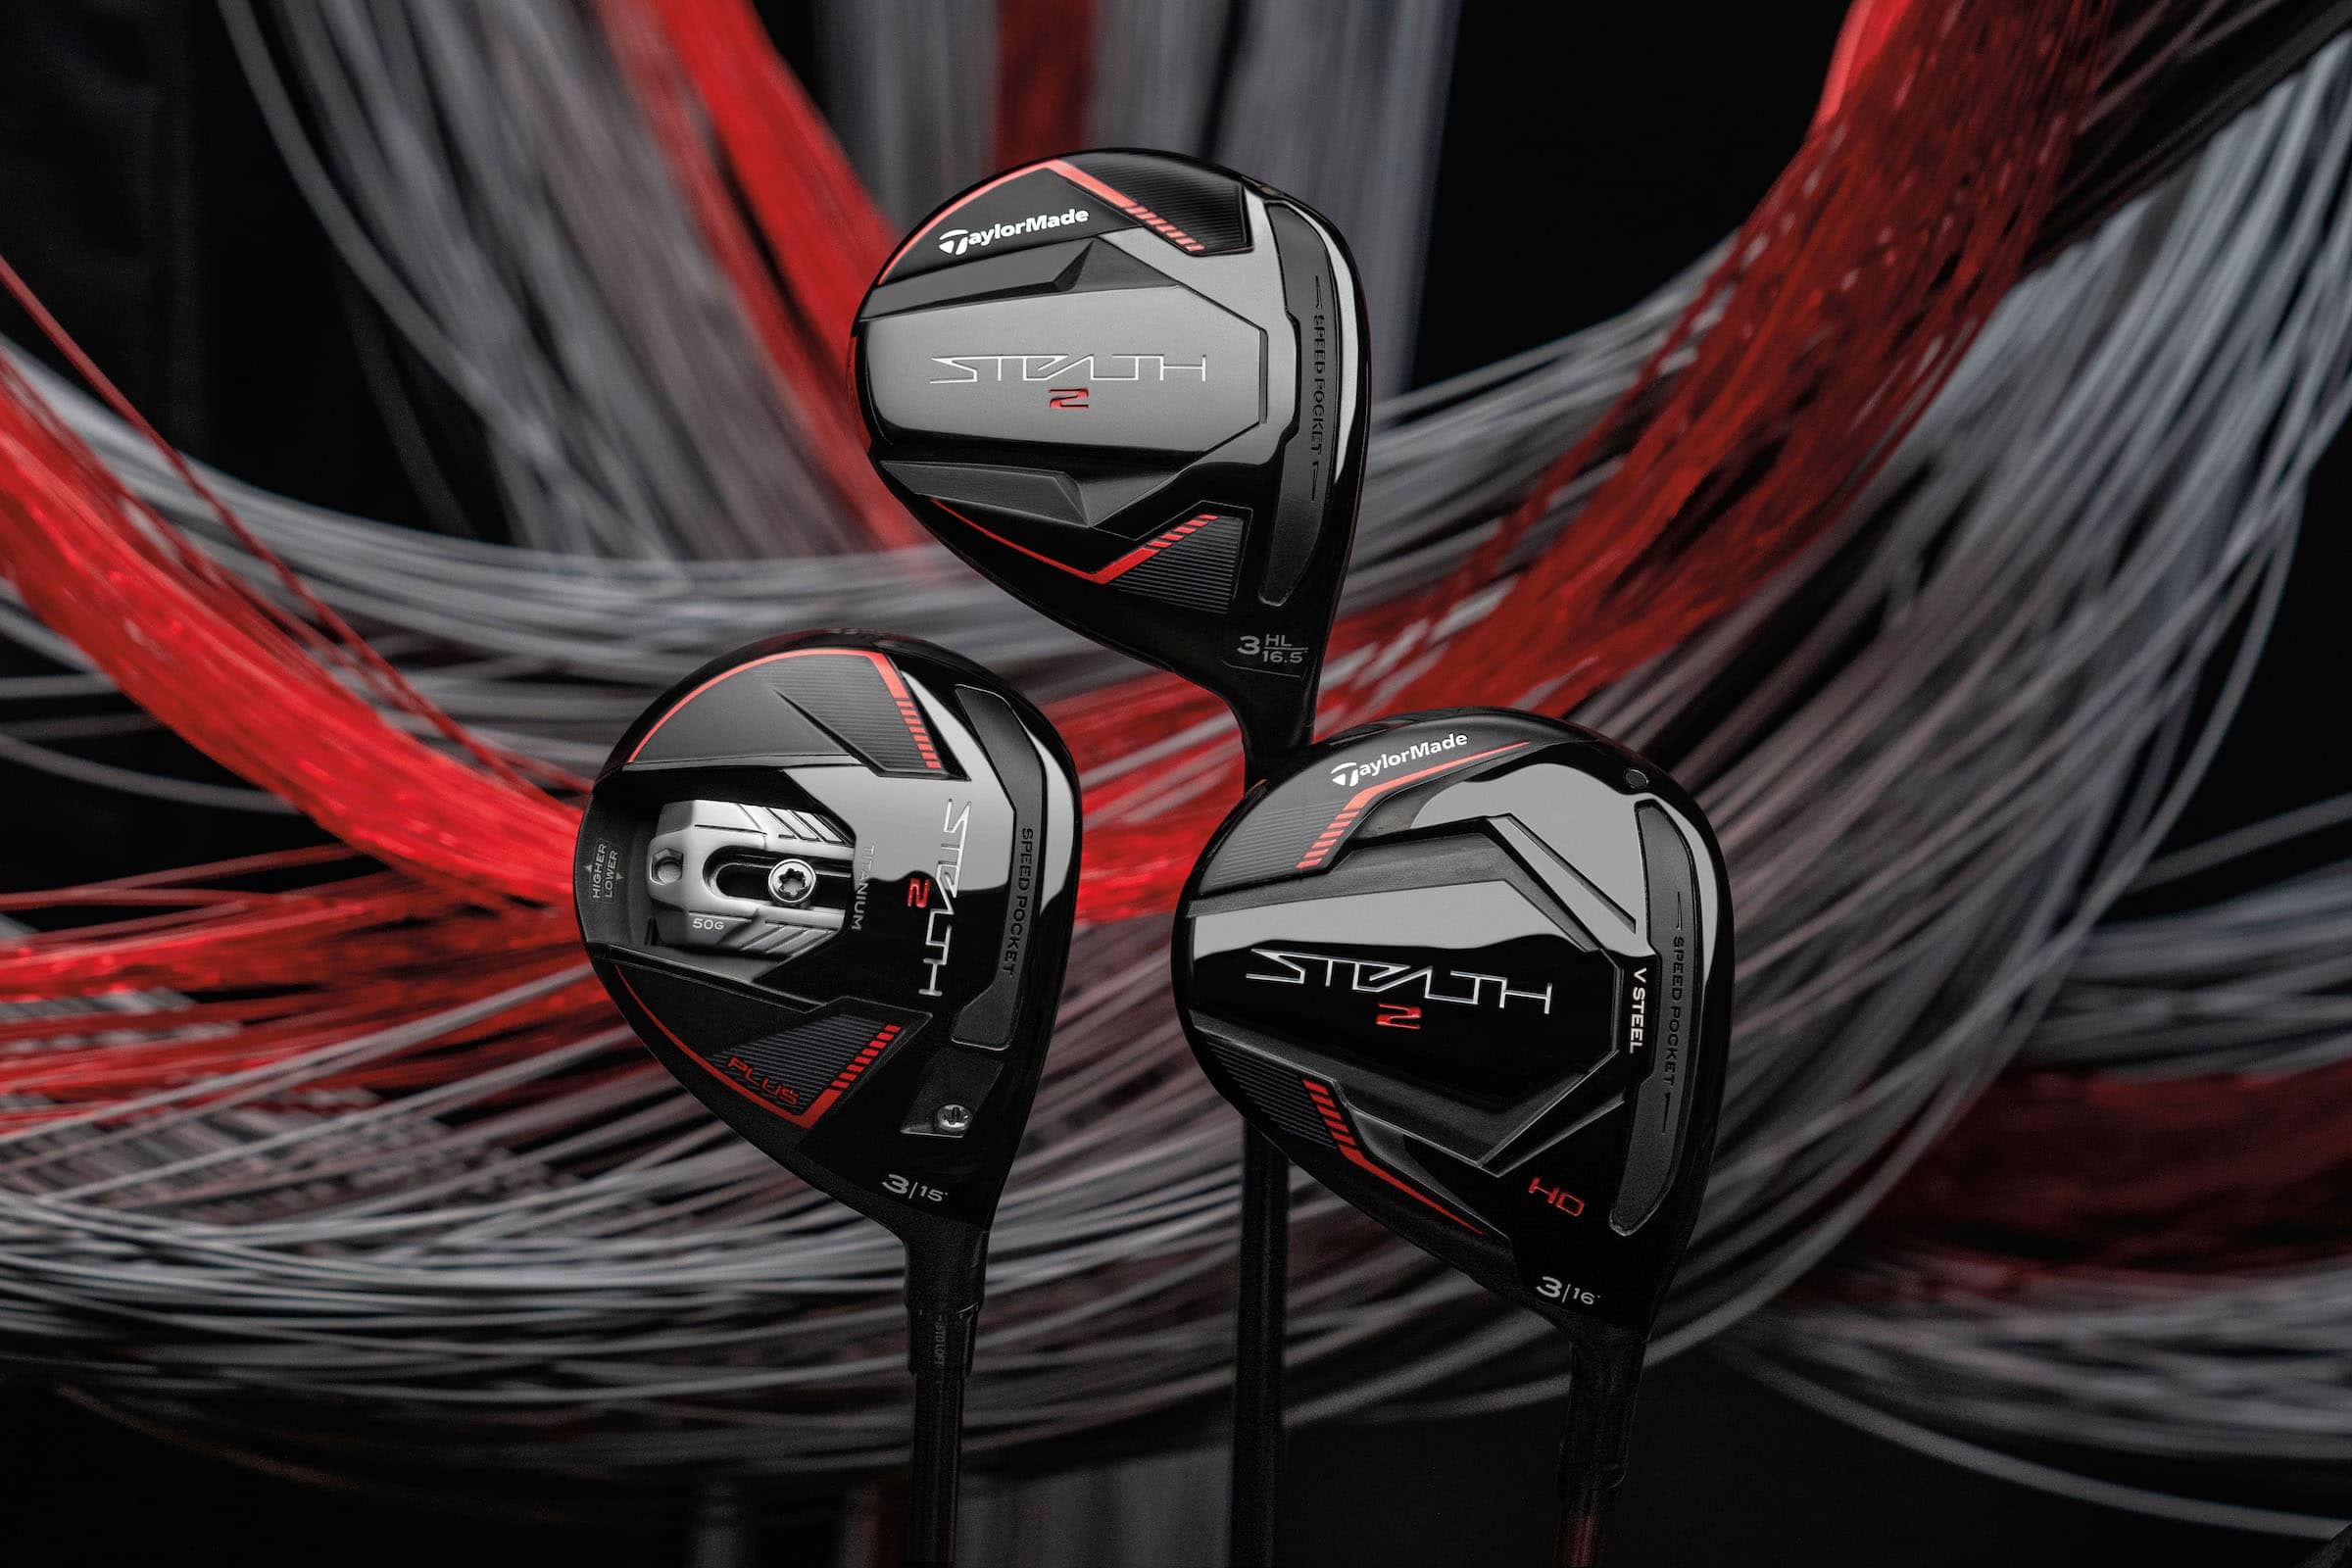 Taylormade announces new family of stealth 2 clubs versatile designs and breakthrough technologies to fit golfers of all abilities